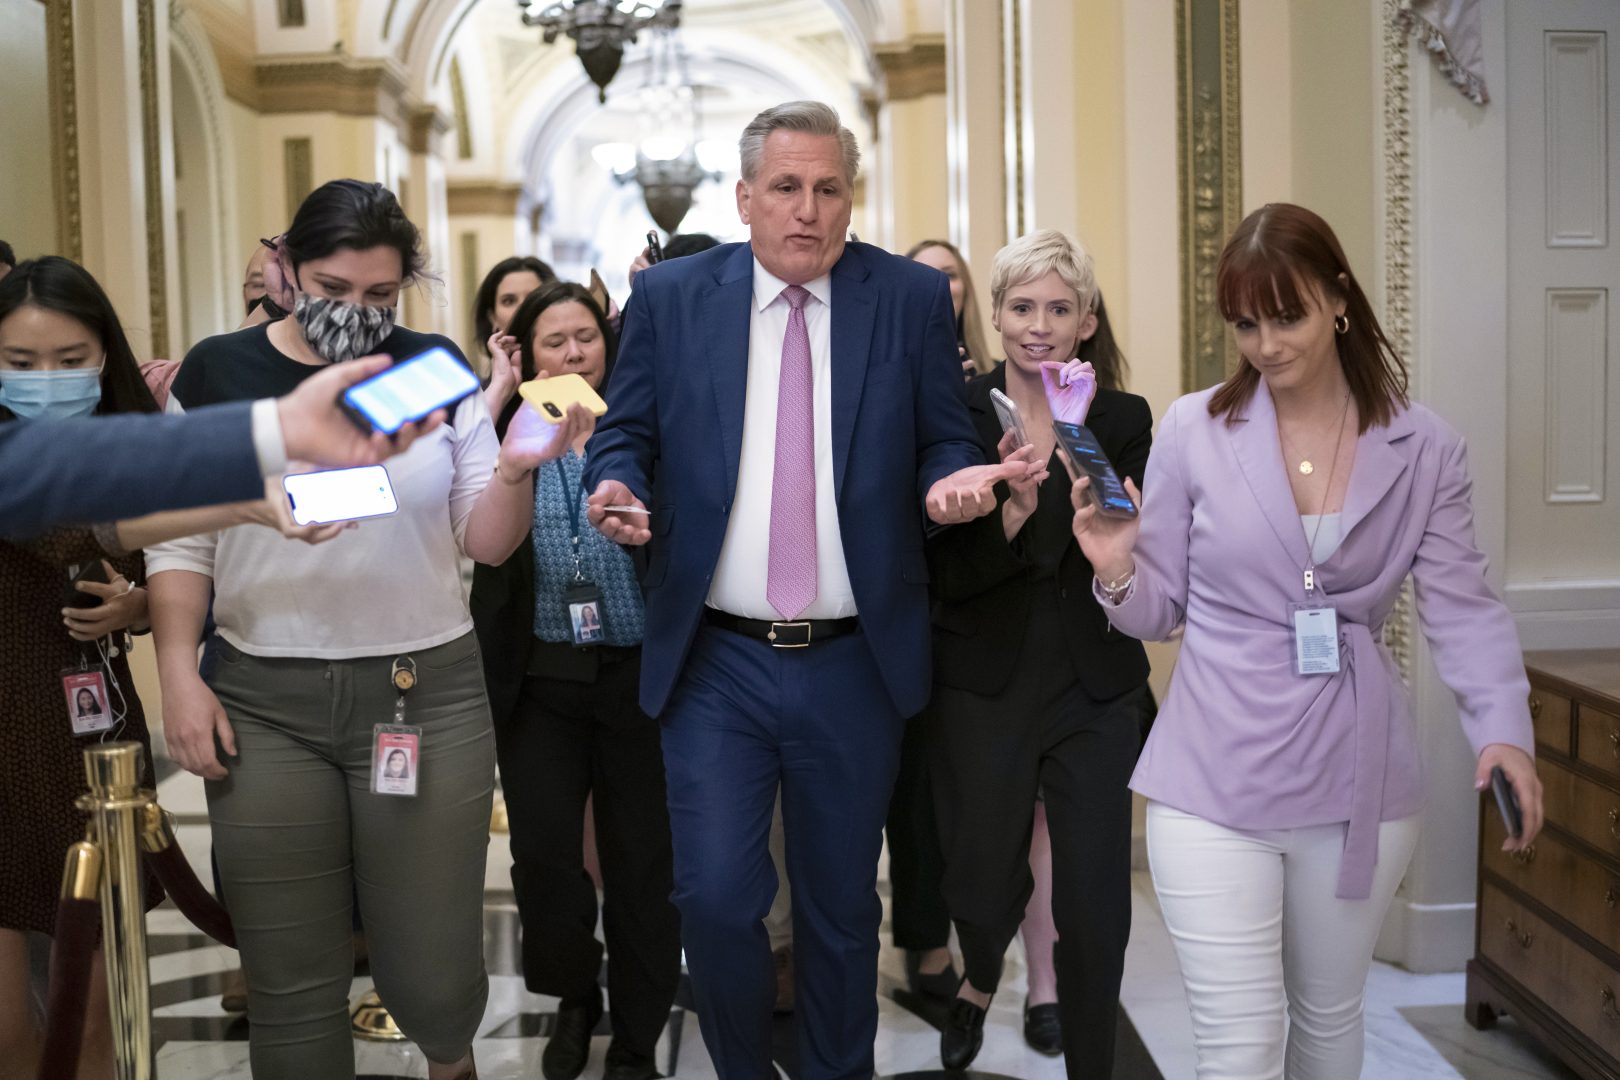 House Minority Leader Kevin McCarthy, R-Calif., heads to his office surrounded by reporters after House investigators issued a subpoena to McCarthy and four other GOP lawmakers as part of their probe into the violent Jan. 6 insurrection, at the Capitol in Washington, Thursday, May 12, 2022. The House Select Committee on the January 6 Attack has been investigating McCarthy's conversations with then-President Donald Trump the day of the attack and meetings that the four other lawmakers had with the White House as Trump and his aides conspired how to overturn his defeat. (AP Photo/J. Scott Applewhite)